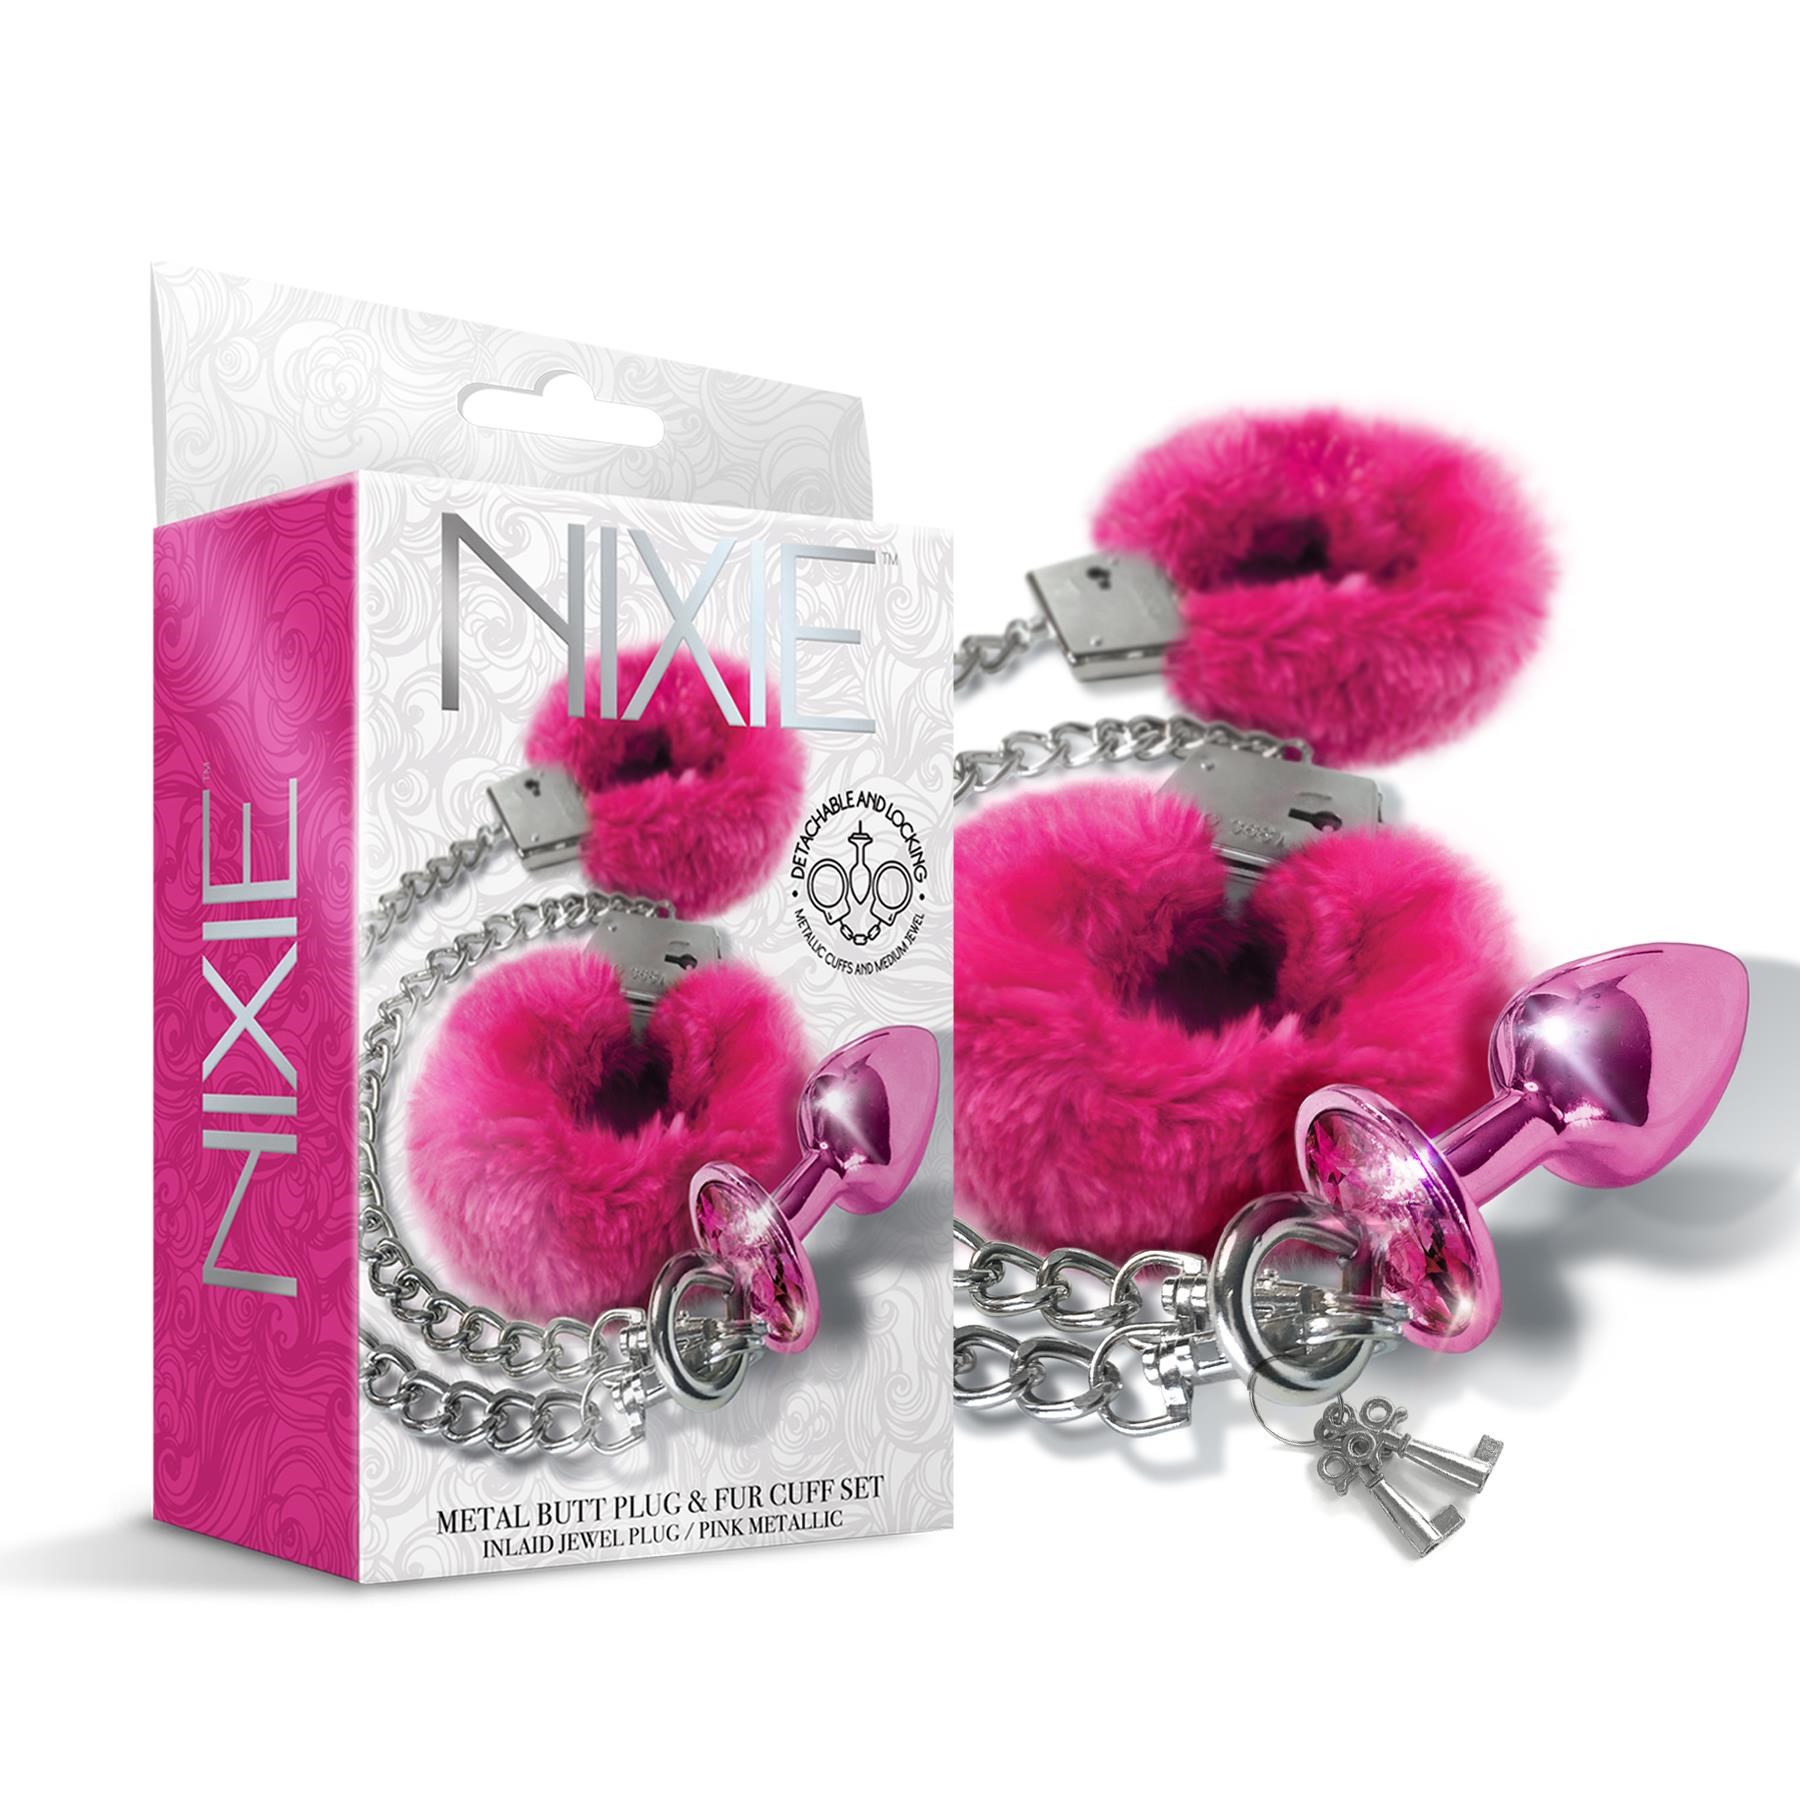 Nixie Metal Butt Plug and Fur Cuff Set - Product and Packaging Shot - Pink